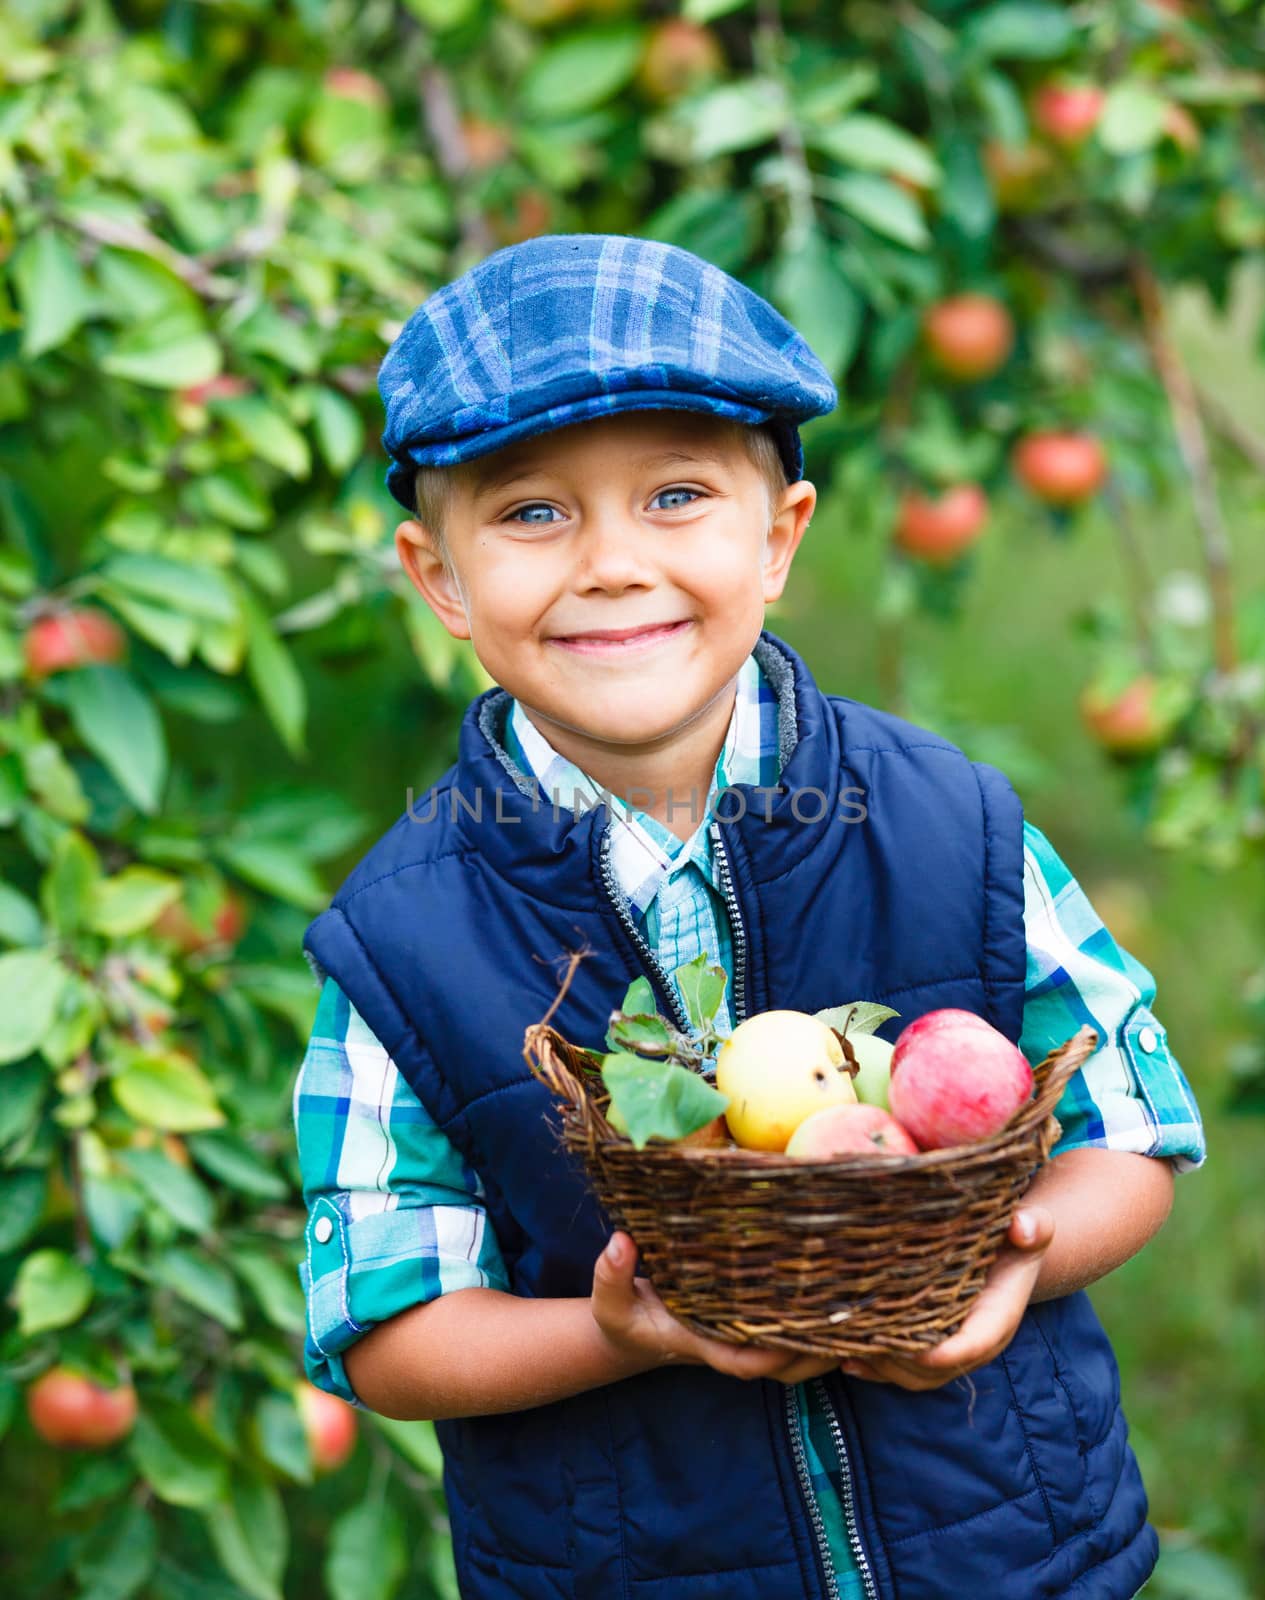 Harvesting apples. Cute little boy helping in the garden and picking apples in the basket.